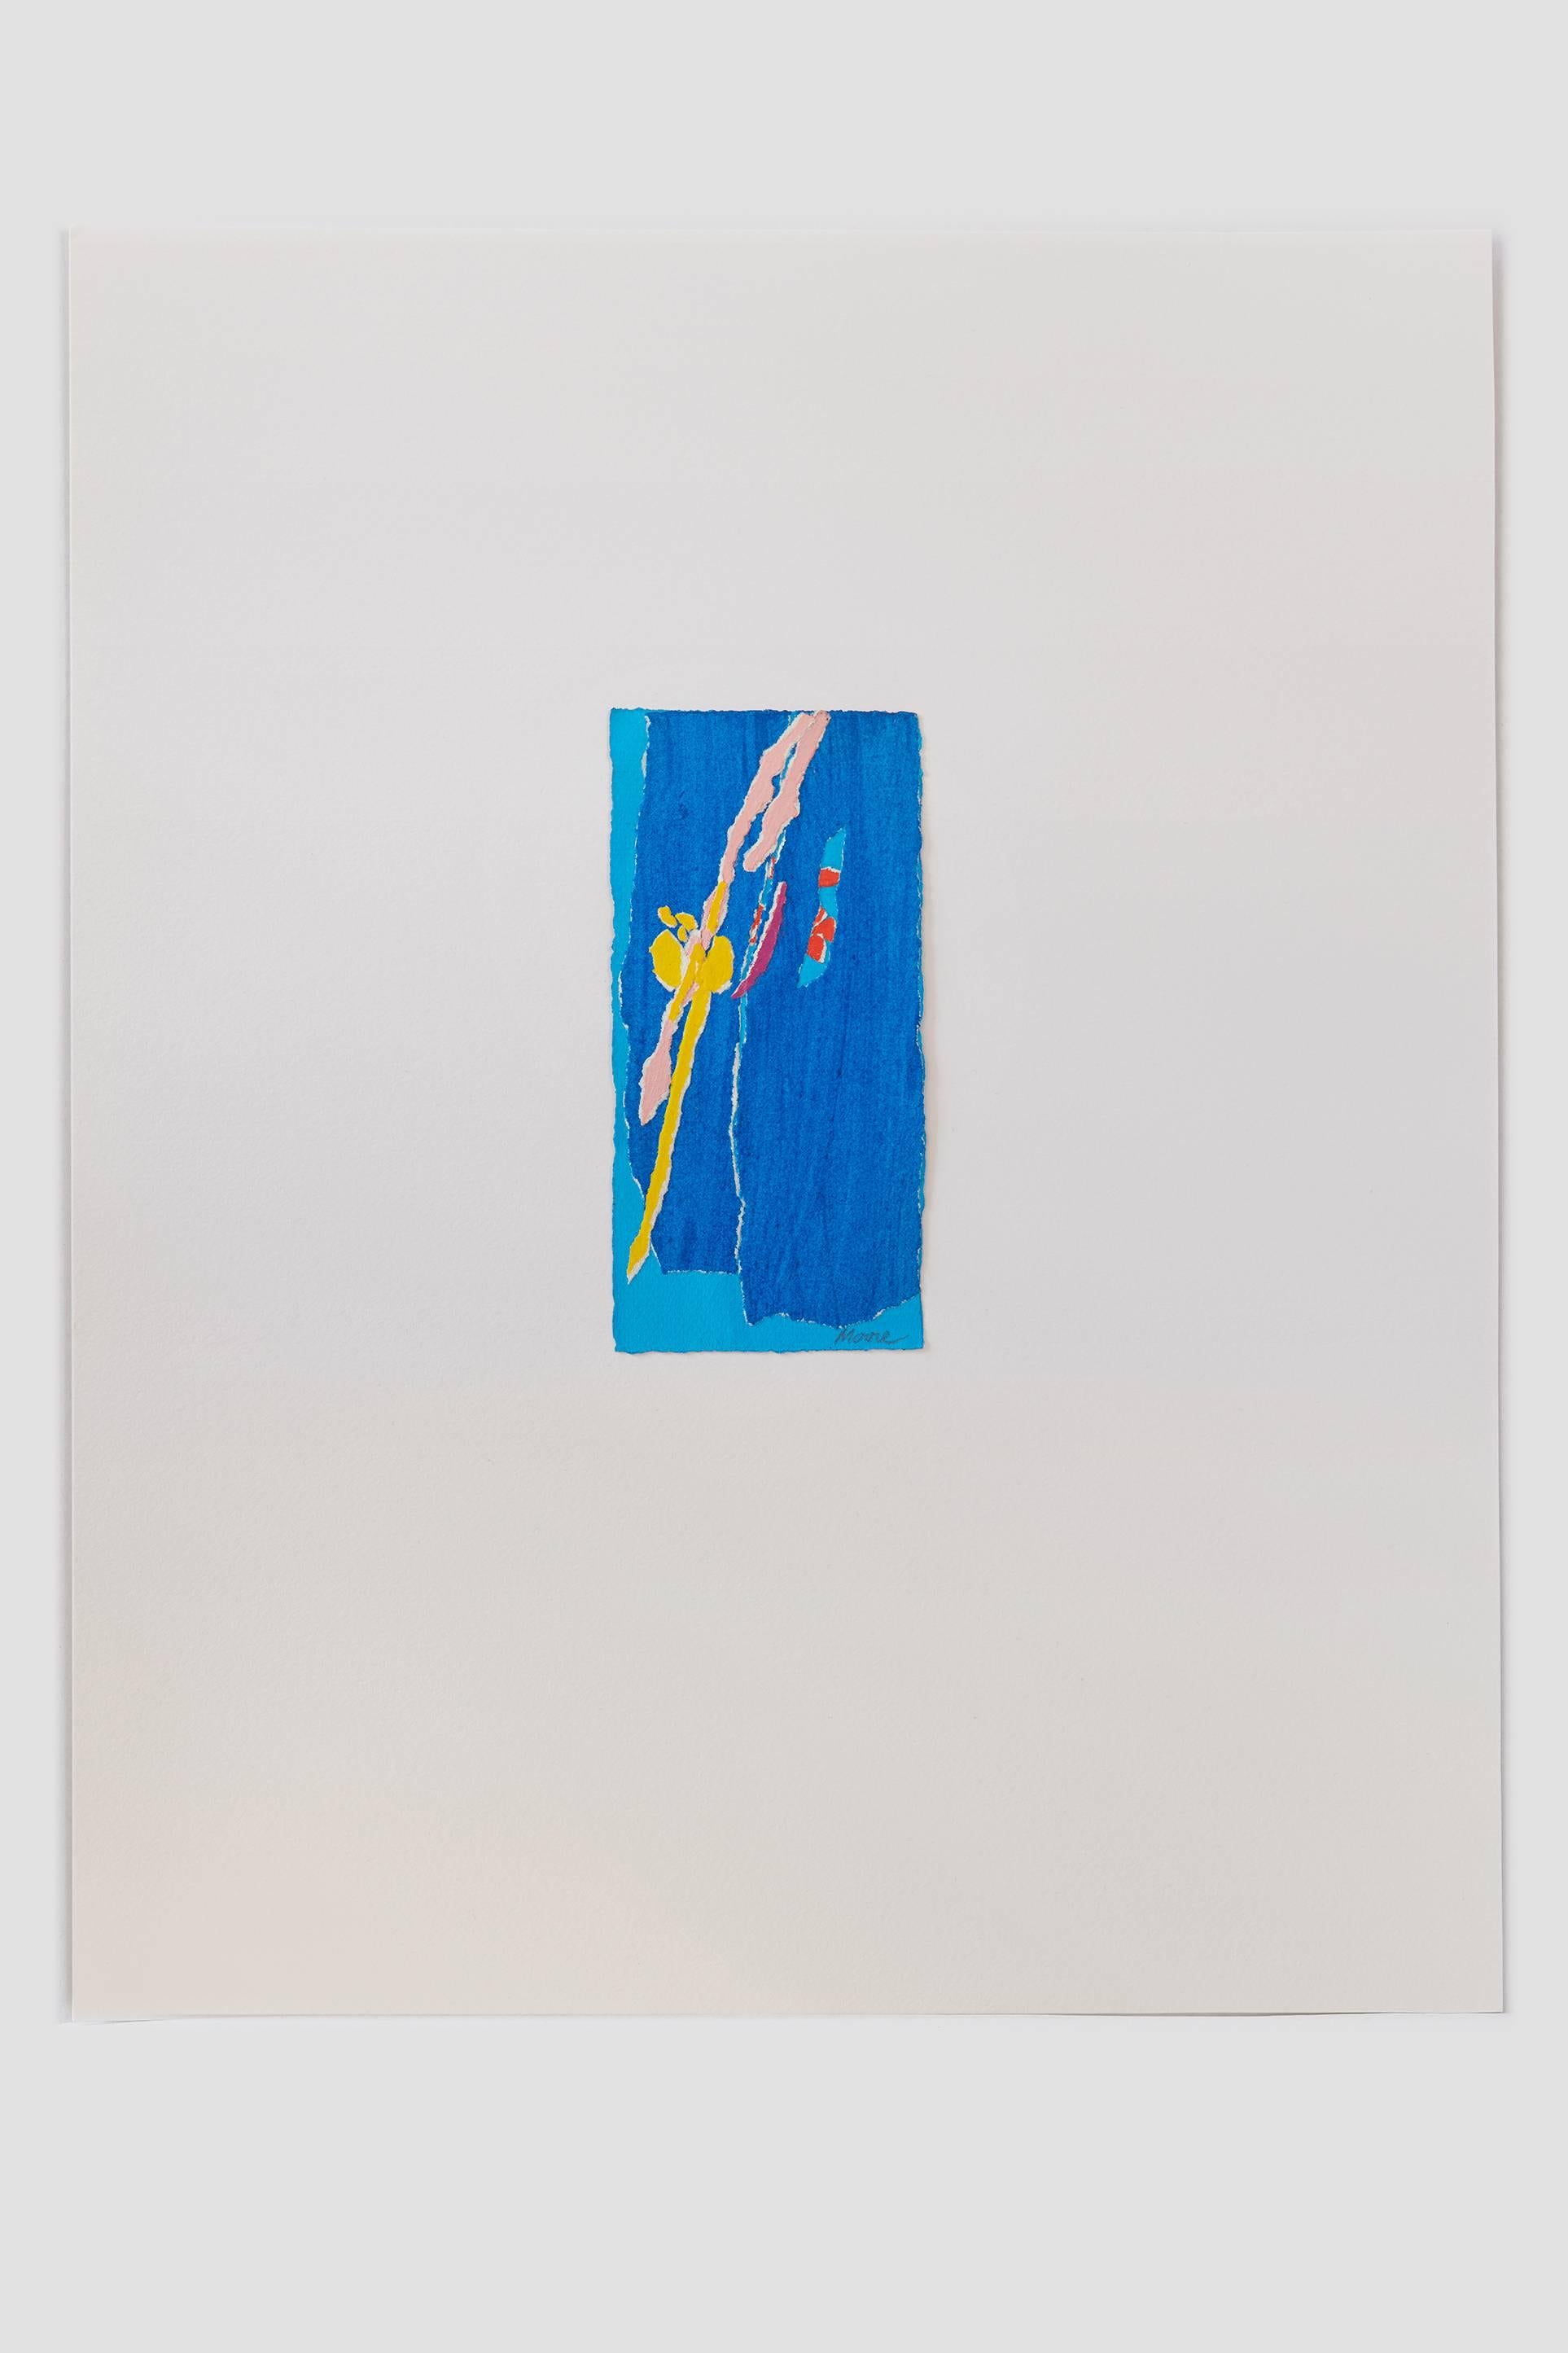 Untitled III (blue), paint on paper, 20 x 16 inches. Blue and yellow rectangle - Abstract Mixed Media Art by James Moore